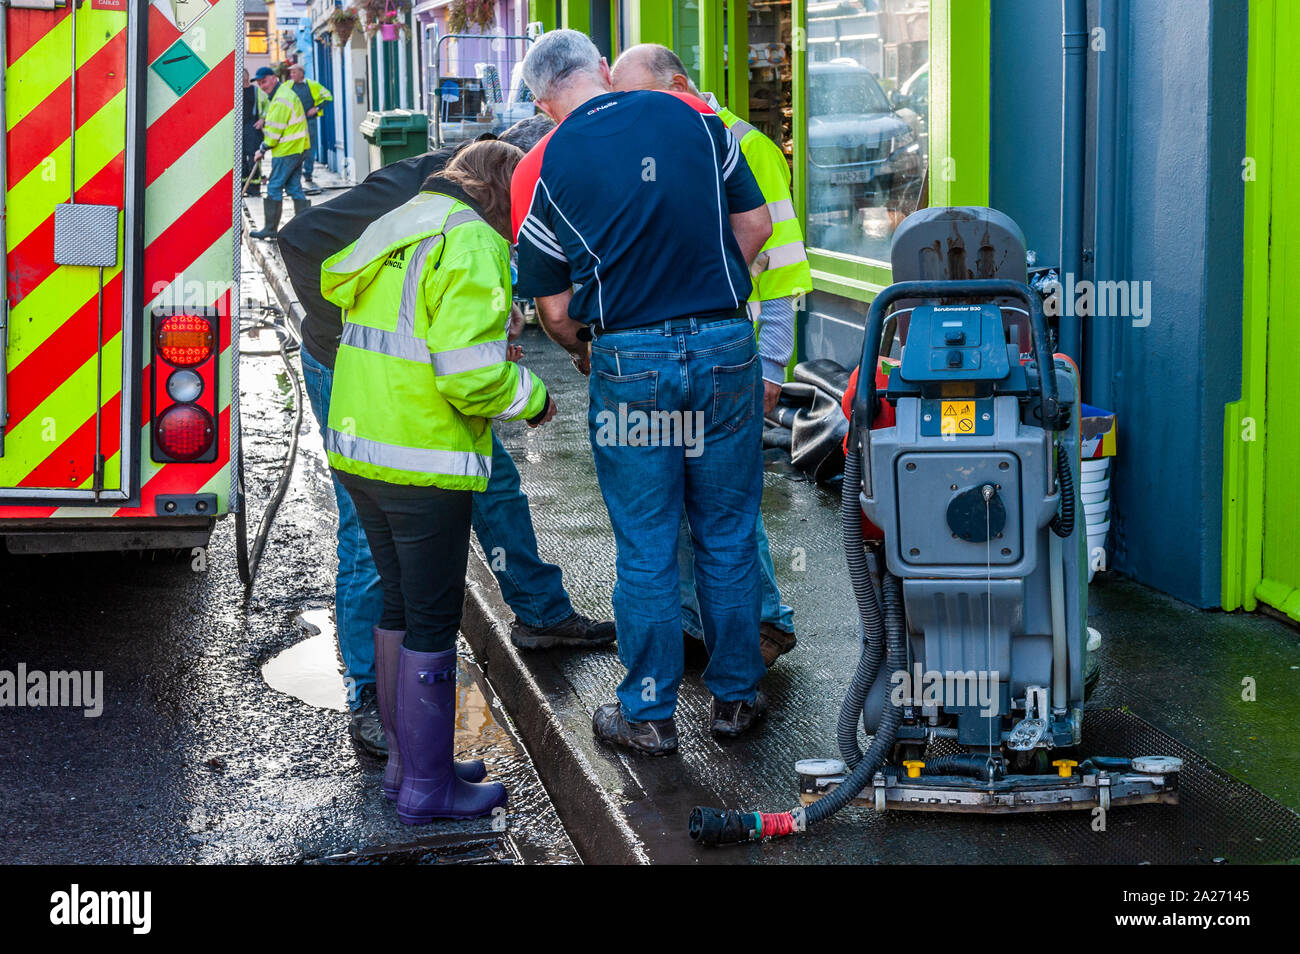 Schull, West Cork, Ireland. 1st Oct, 2019. Shops in Schull Main Street were hit badly by muddy flood waters this morning. At approximately 4am, drains in the street couldn't handle any more torrential rain and, due to being blocked with leaves and silt, overflowed causing a number of shops to flood. Cork County Council employees inspected the damage to the shops. Credit: Andy Gibson/Alamy Live News. Stock Photo